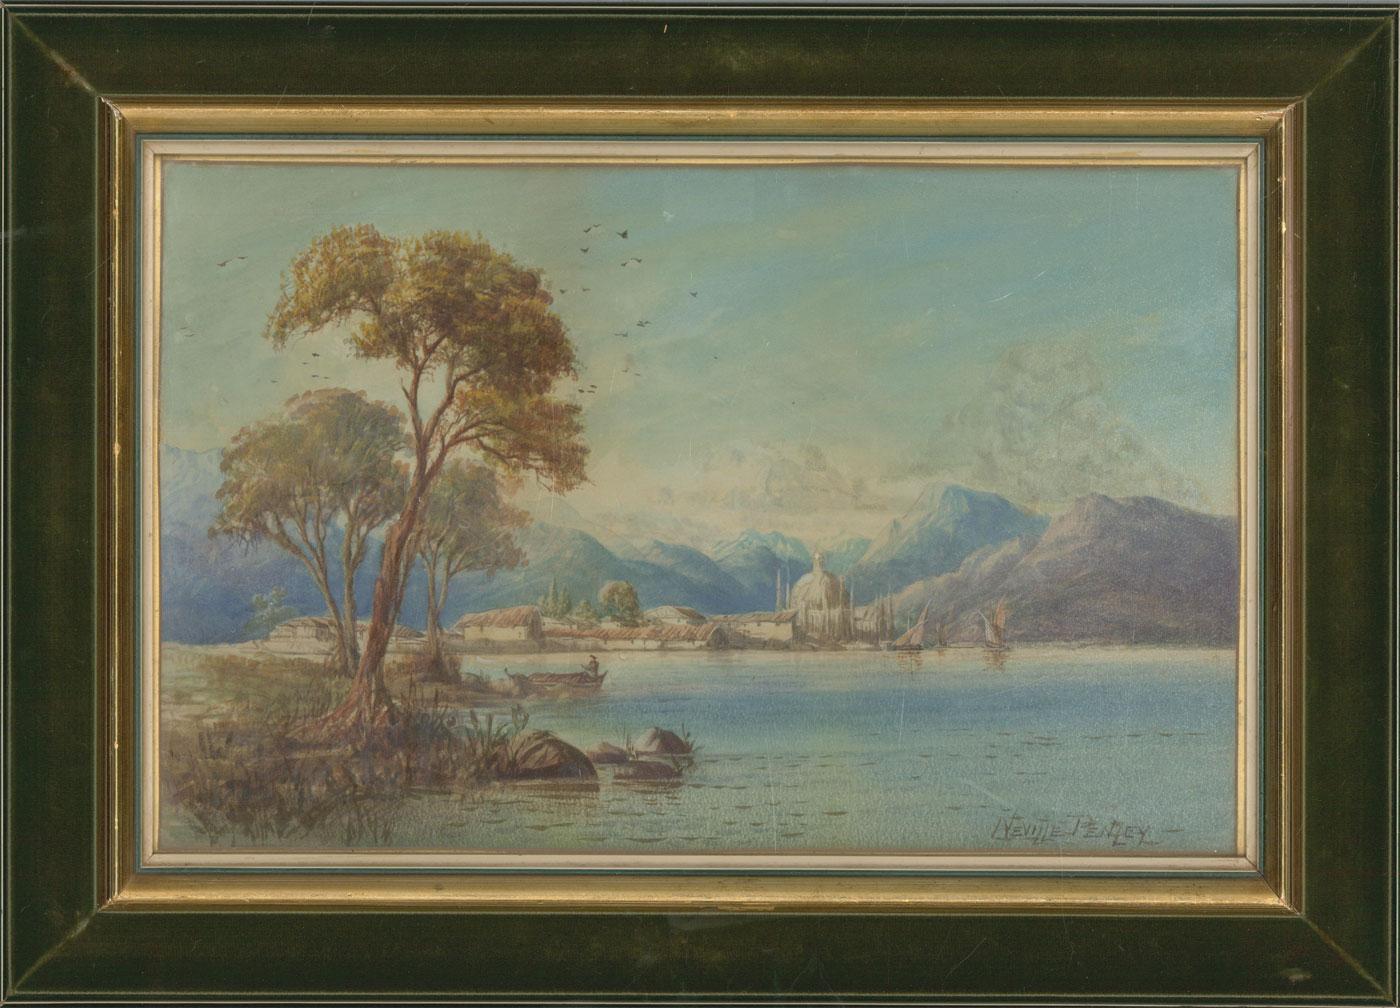 Unknown Landscape Art - Neville Penley - 19th Century Watercolour, Lake Scene with Figures and Town